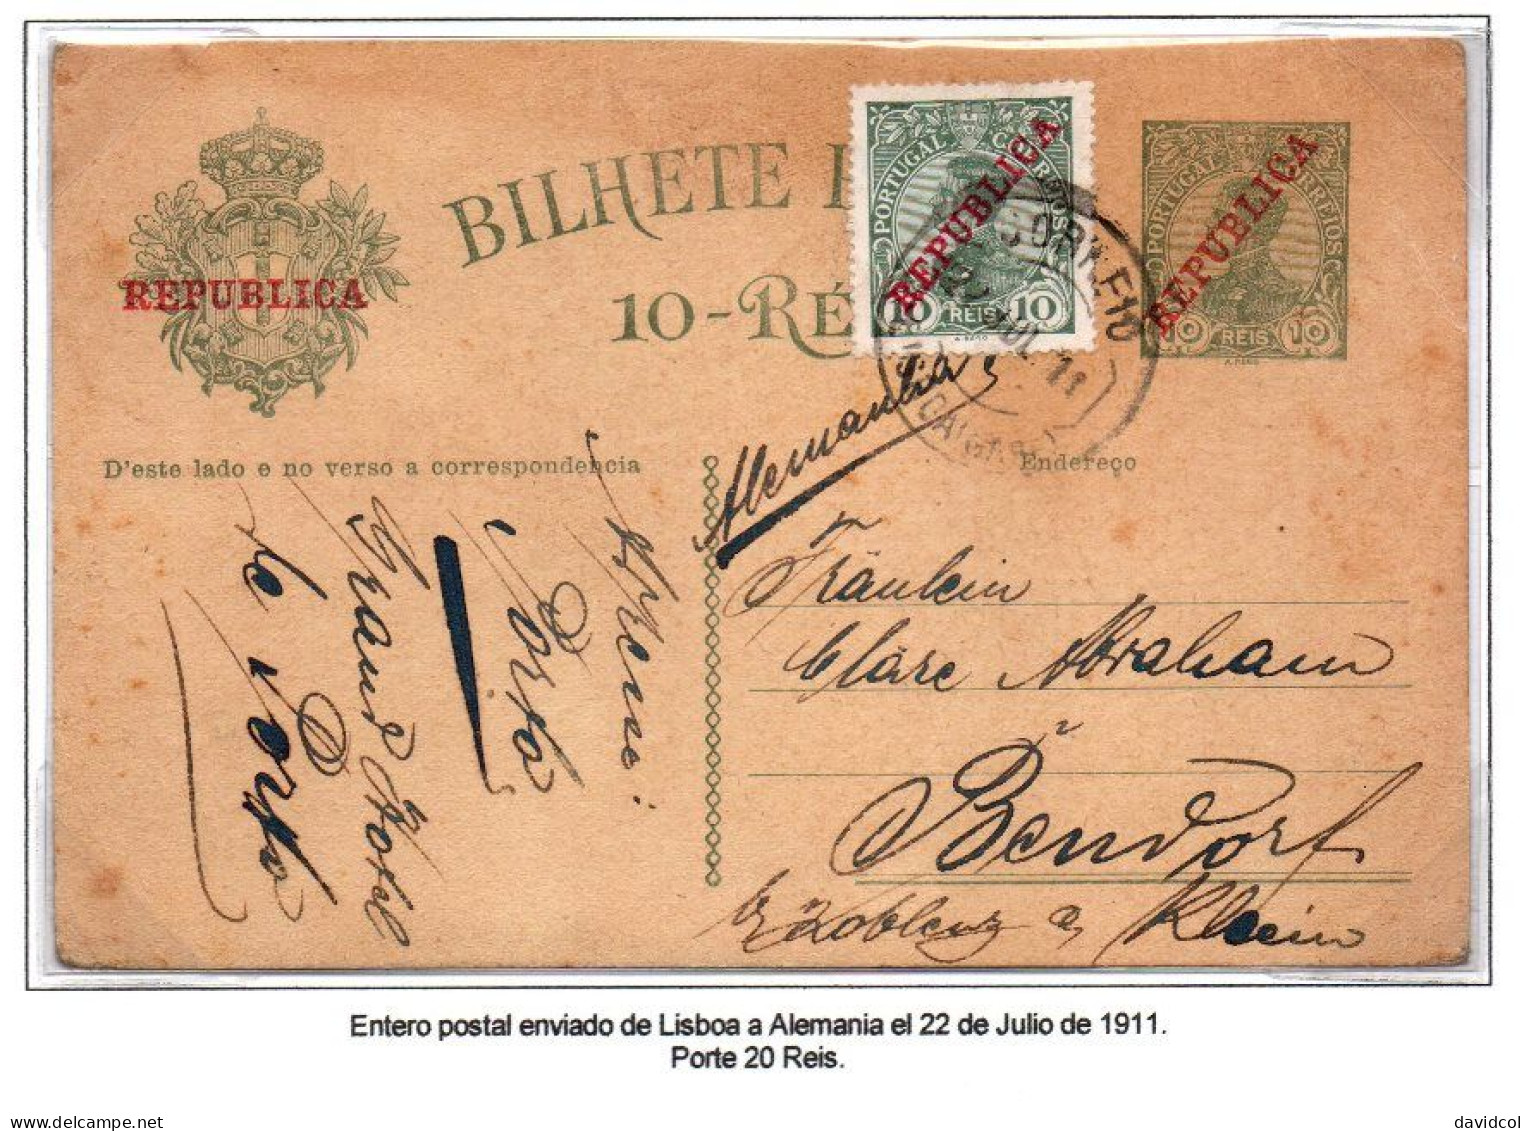 CA680- COVERAUCTION!!!- PORTUGAL -1910 - SC#: - USED POSTCARD FROM LISBOA 22-JUL-1911 TO GERMANY. - Covers & Documents